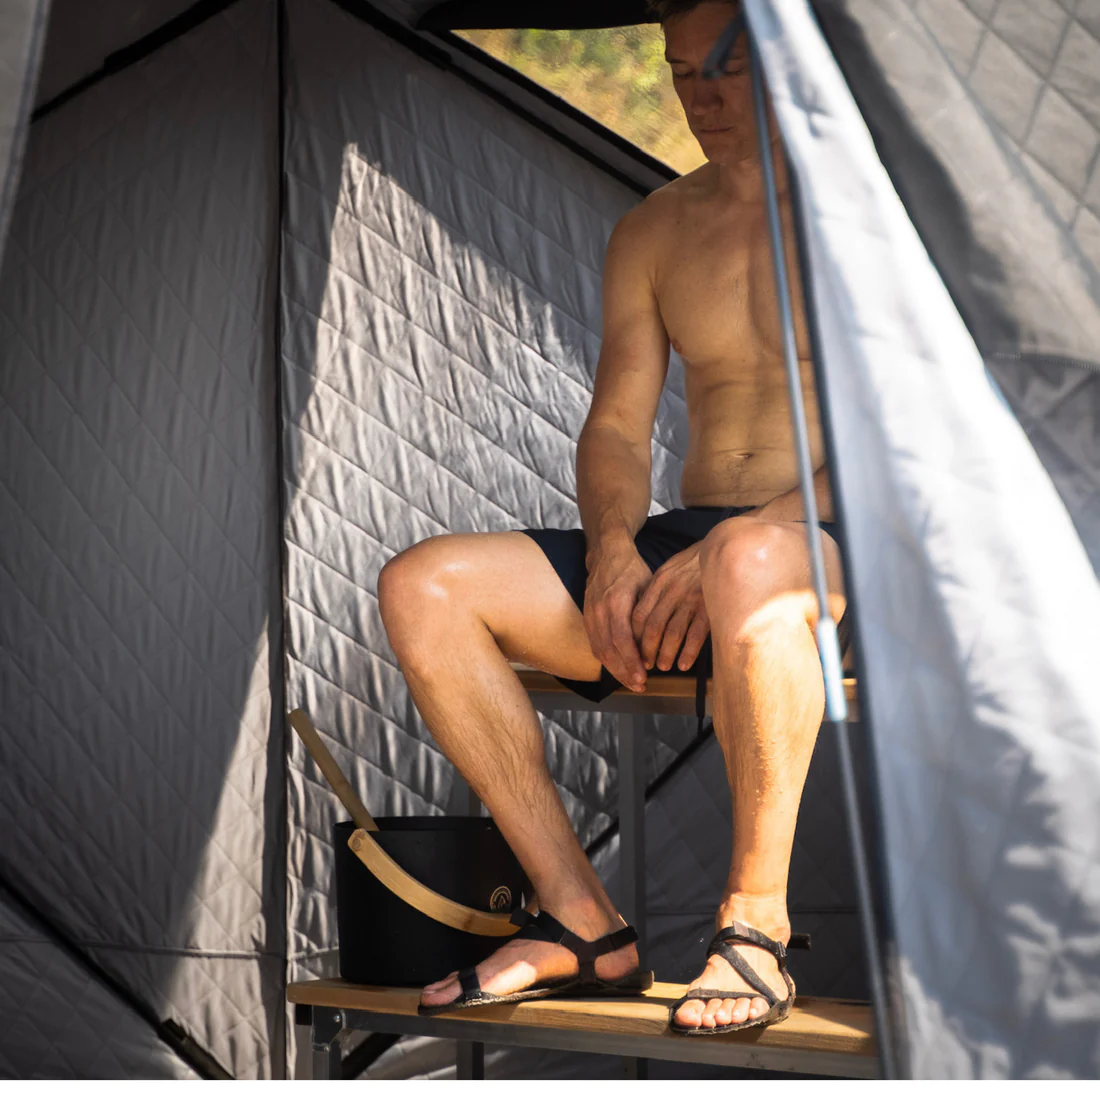 Sitting on the upper bench of a north shore sauna tent with portable bench